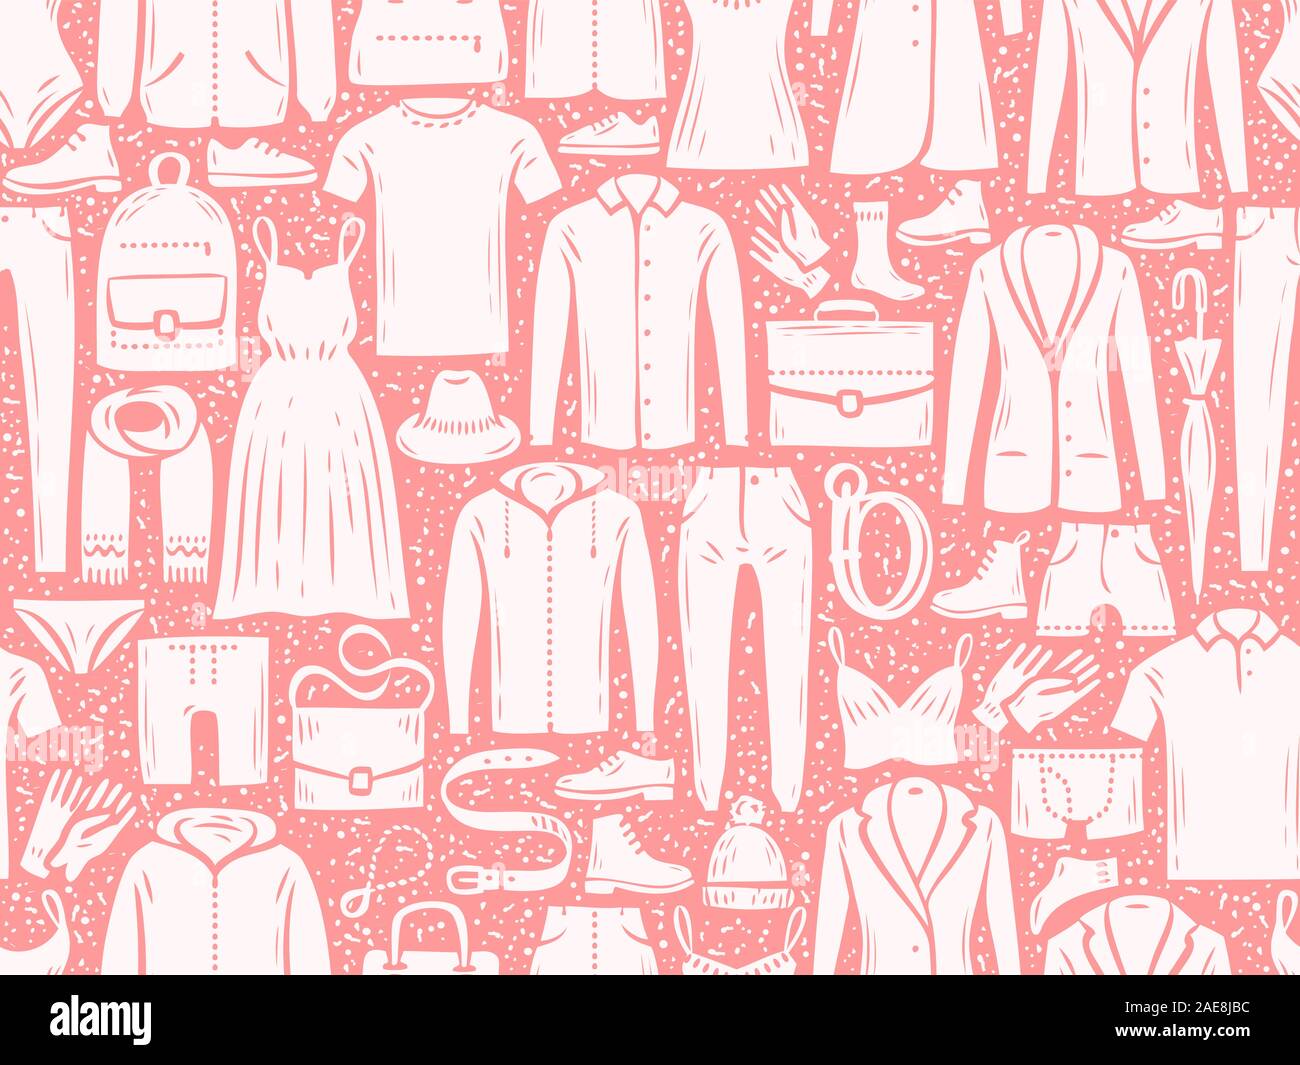 Fashion seamless background, pattern. Clothes vector illustration Stock Vector